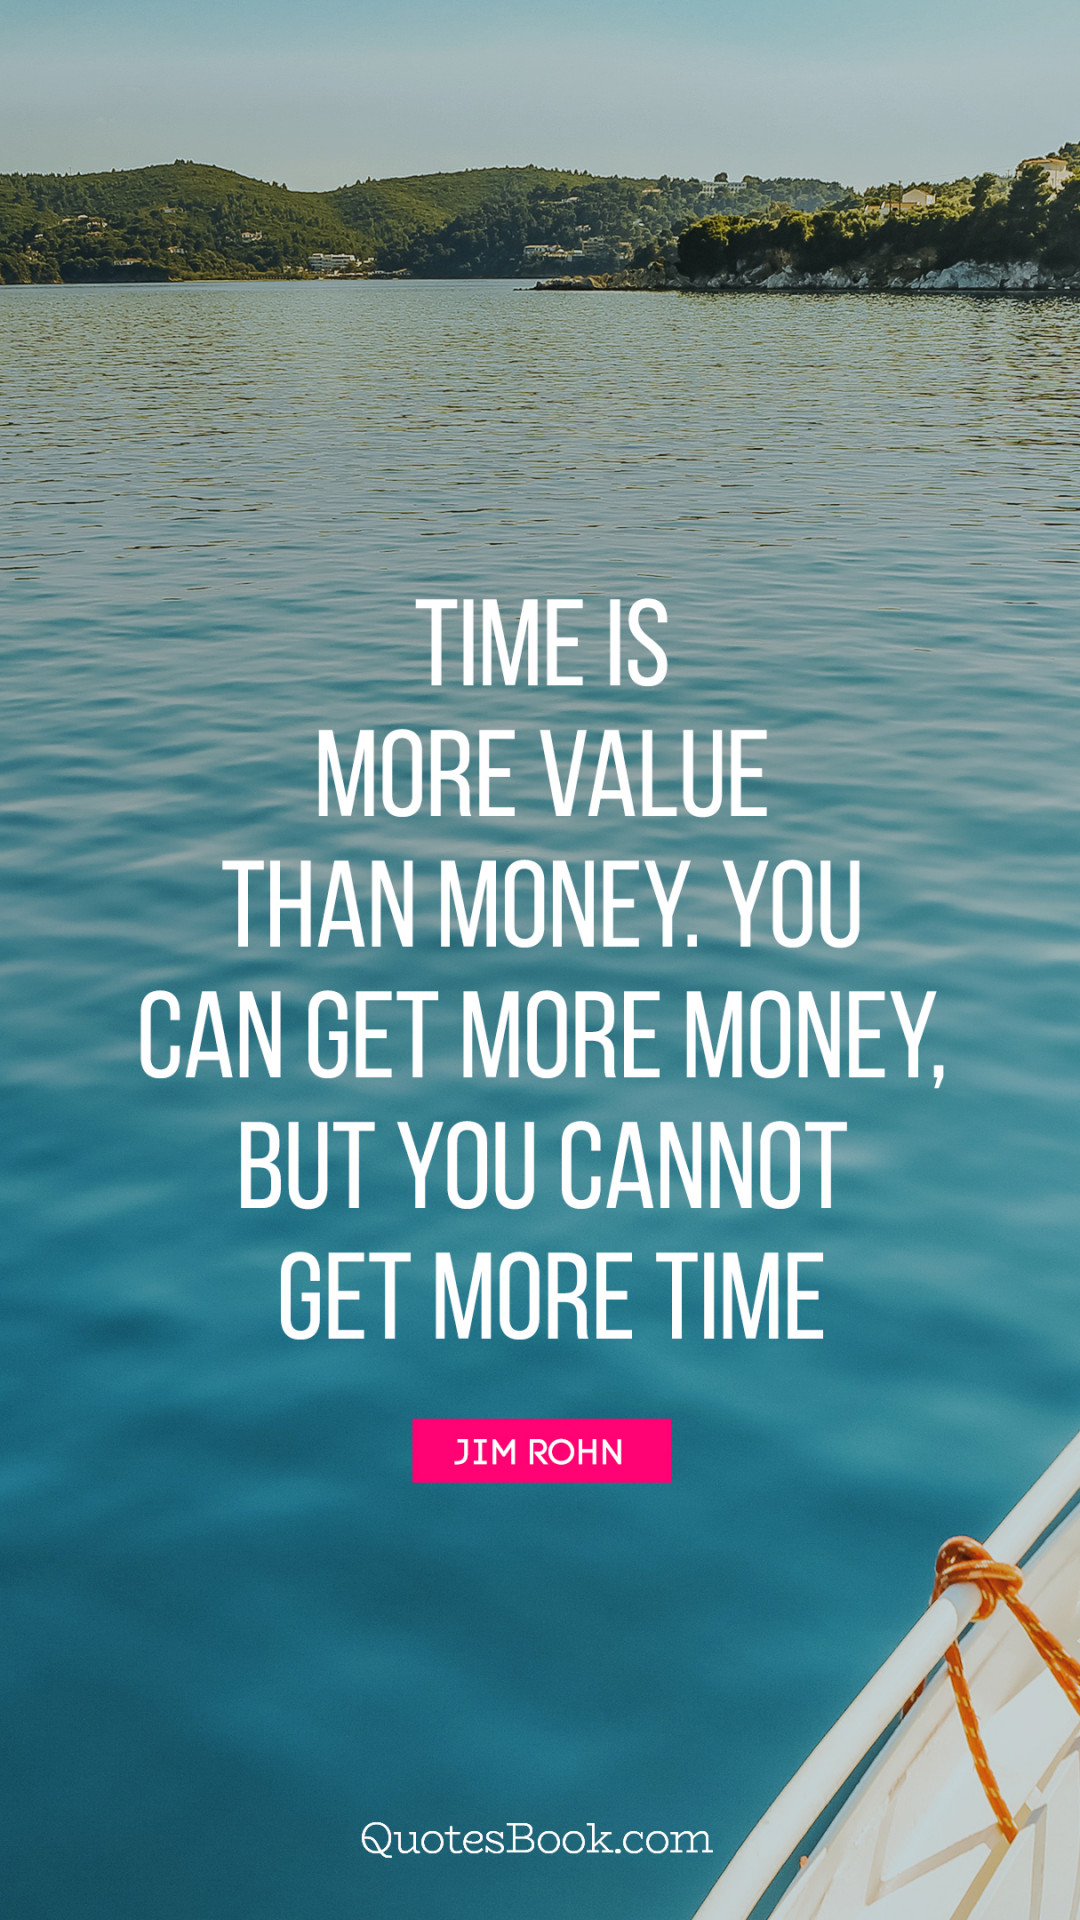 time is more value than money you can get more money but 1080x1920 1302